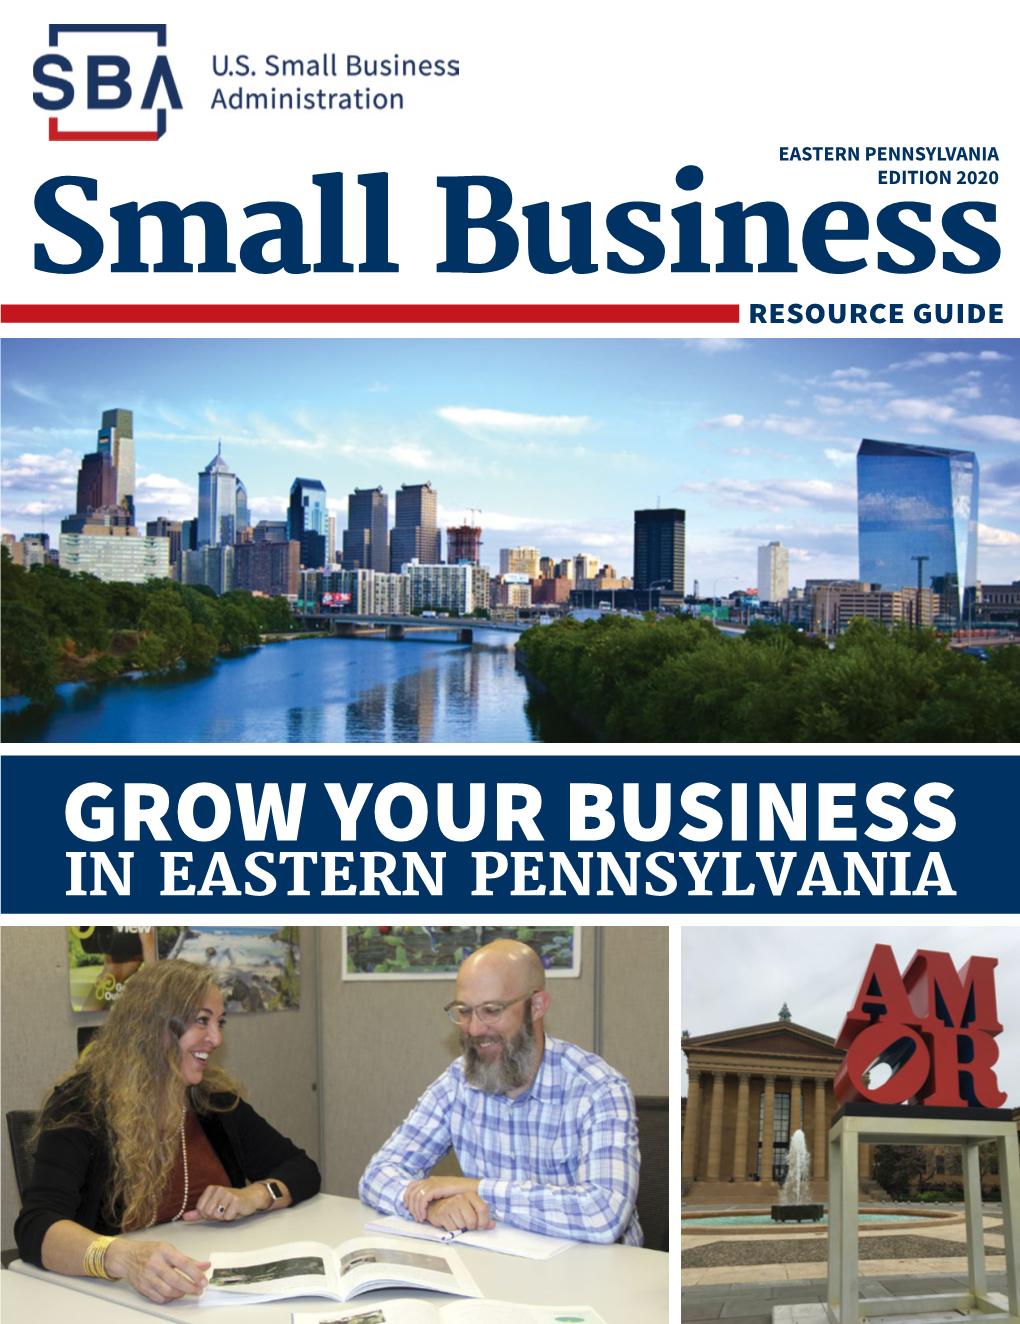 The SBA Eastern Pennsylvania District Office Resource Guide